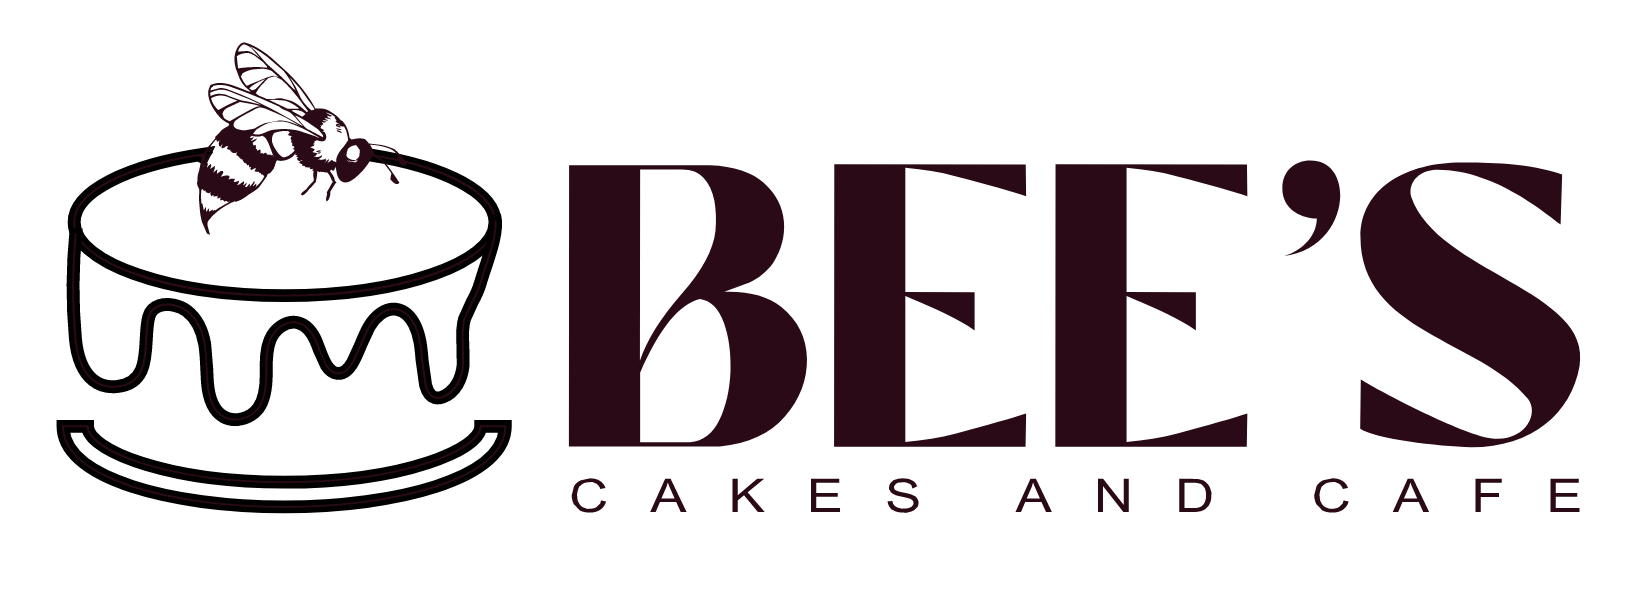 Bees Cakes And Cafe